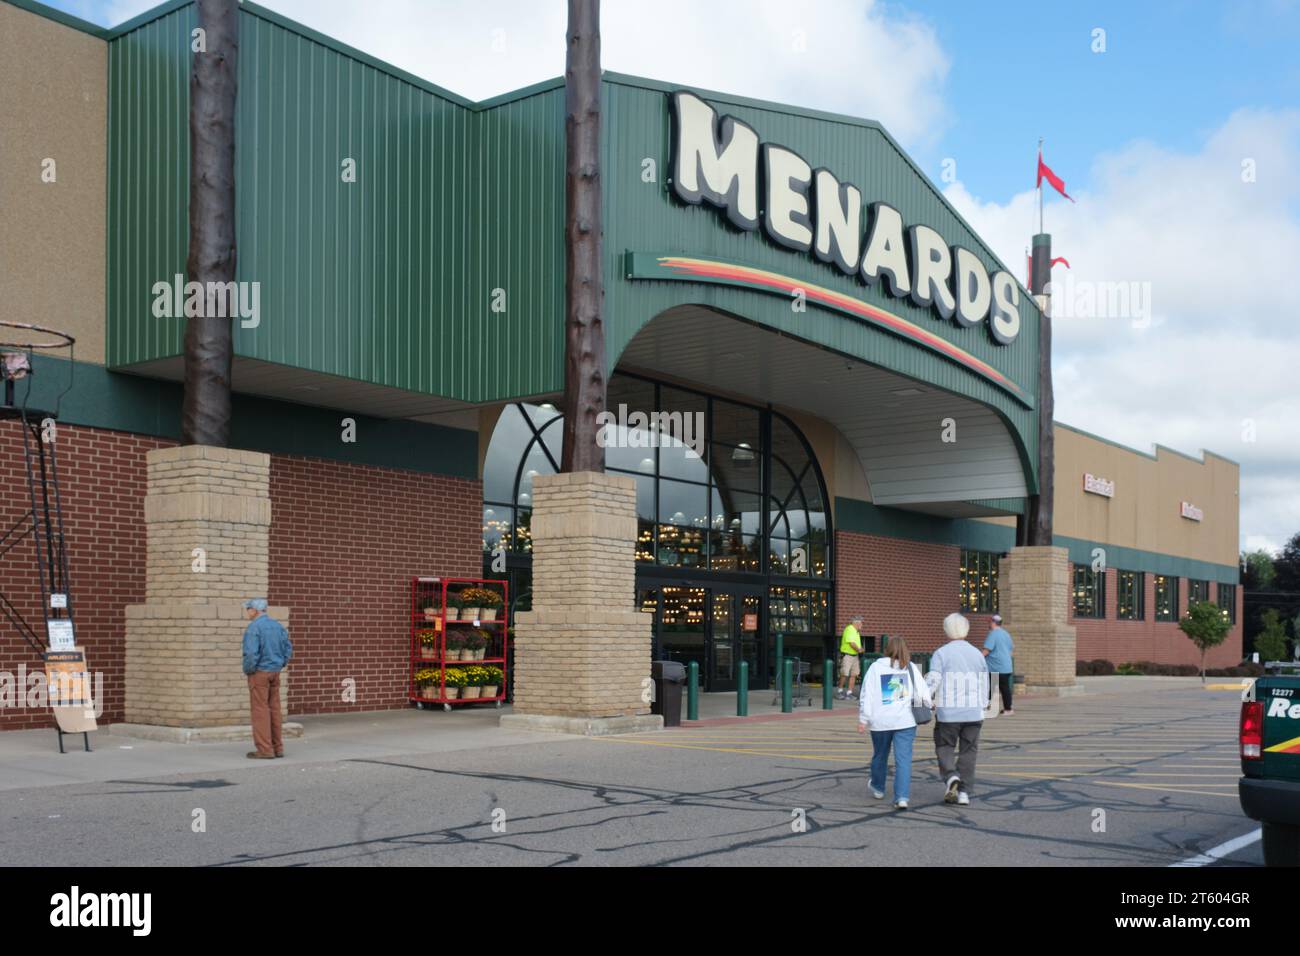 Menards home improvement store exterior with sign Stock Photo